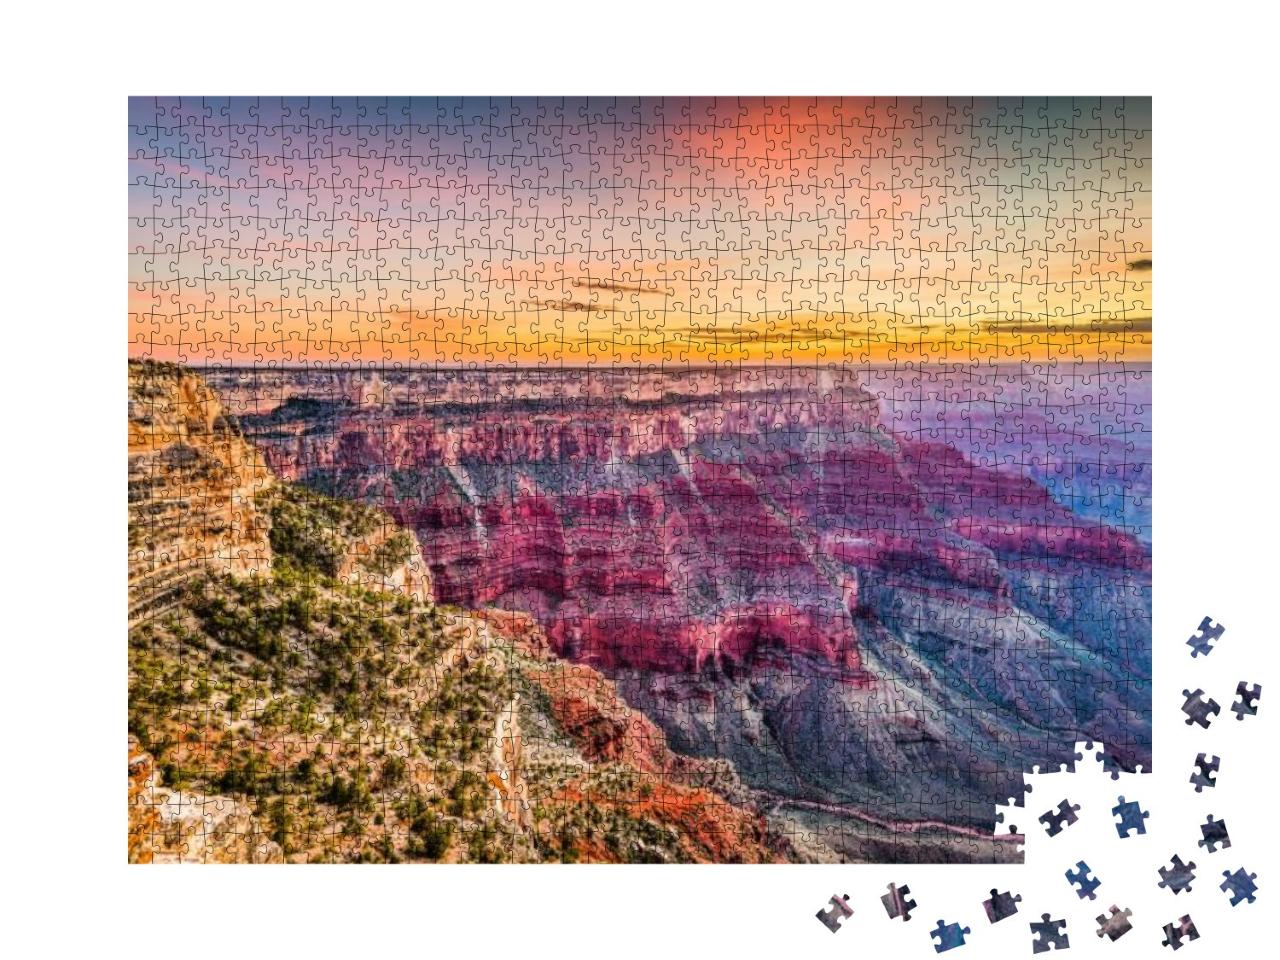 Grand Canyon, Arizona, USA At Dawn from the South Rim... Jigsaw Puzzle with 1000 pieces